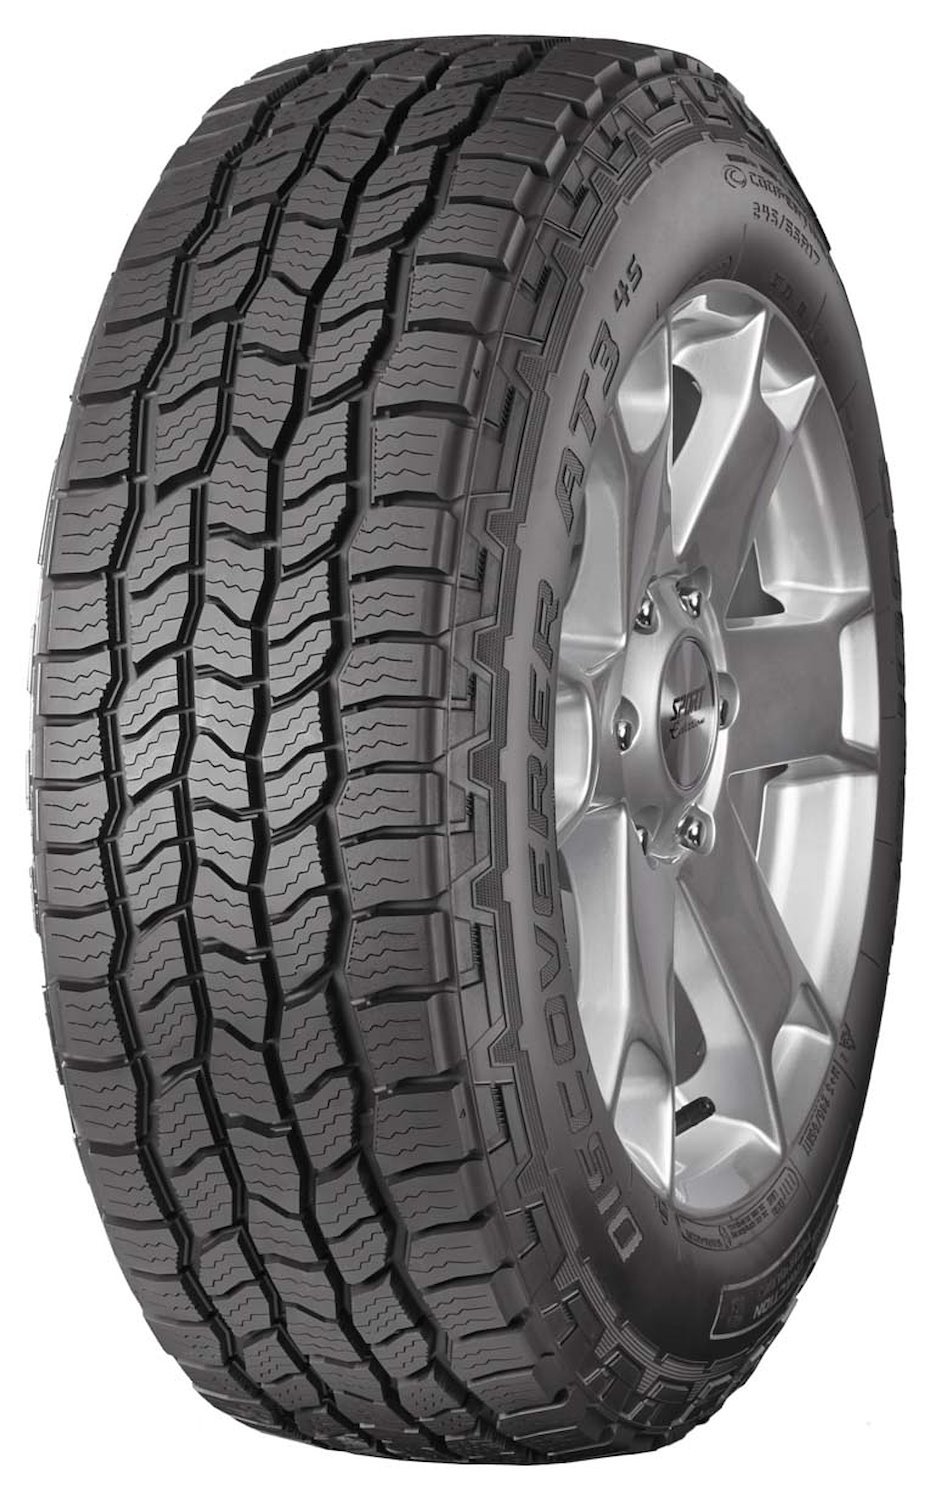 Discoverer AT3 4S All-Terrain Tire, 265/70R17